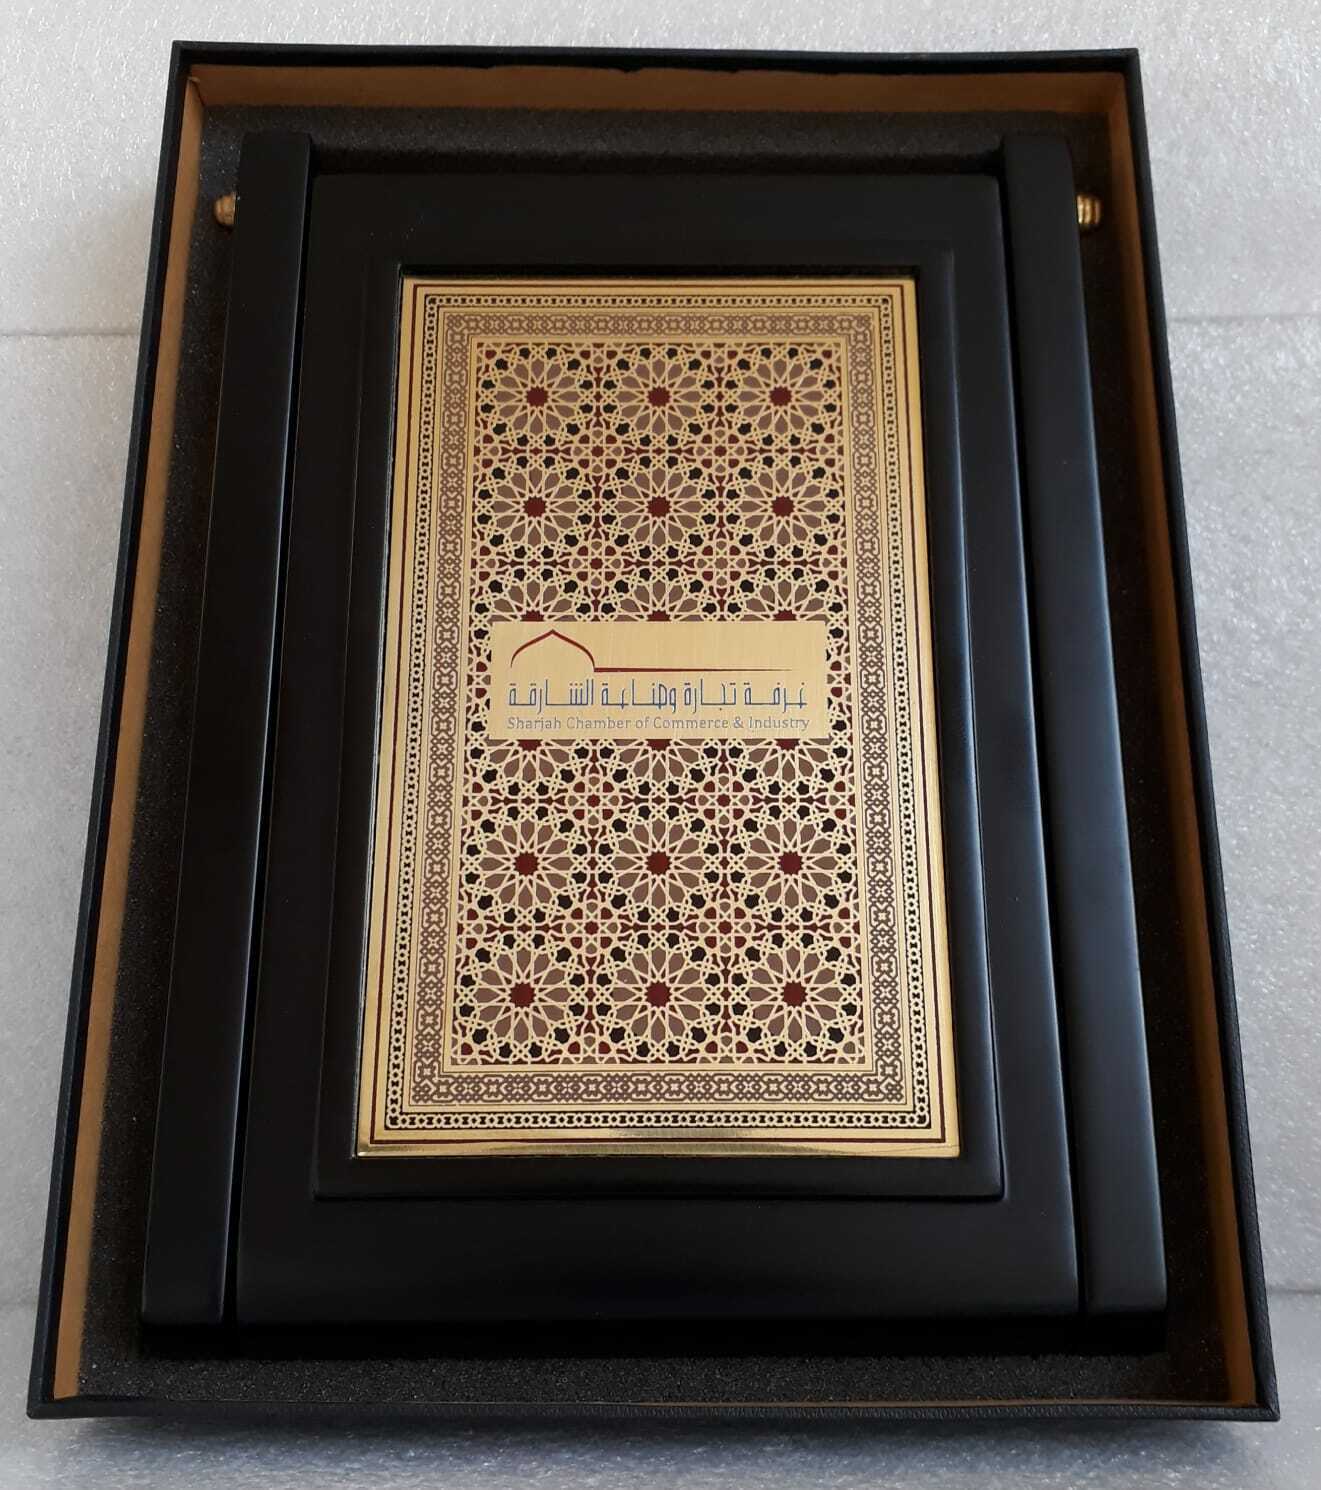 UAE Sharjah Chamber of Commerce & industry medal plaque commemorative rare boxed